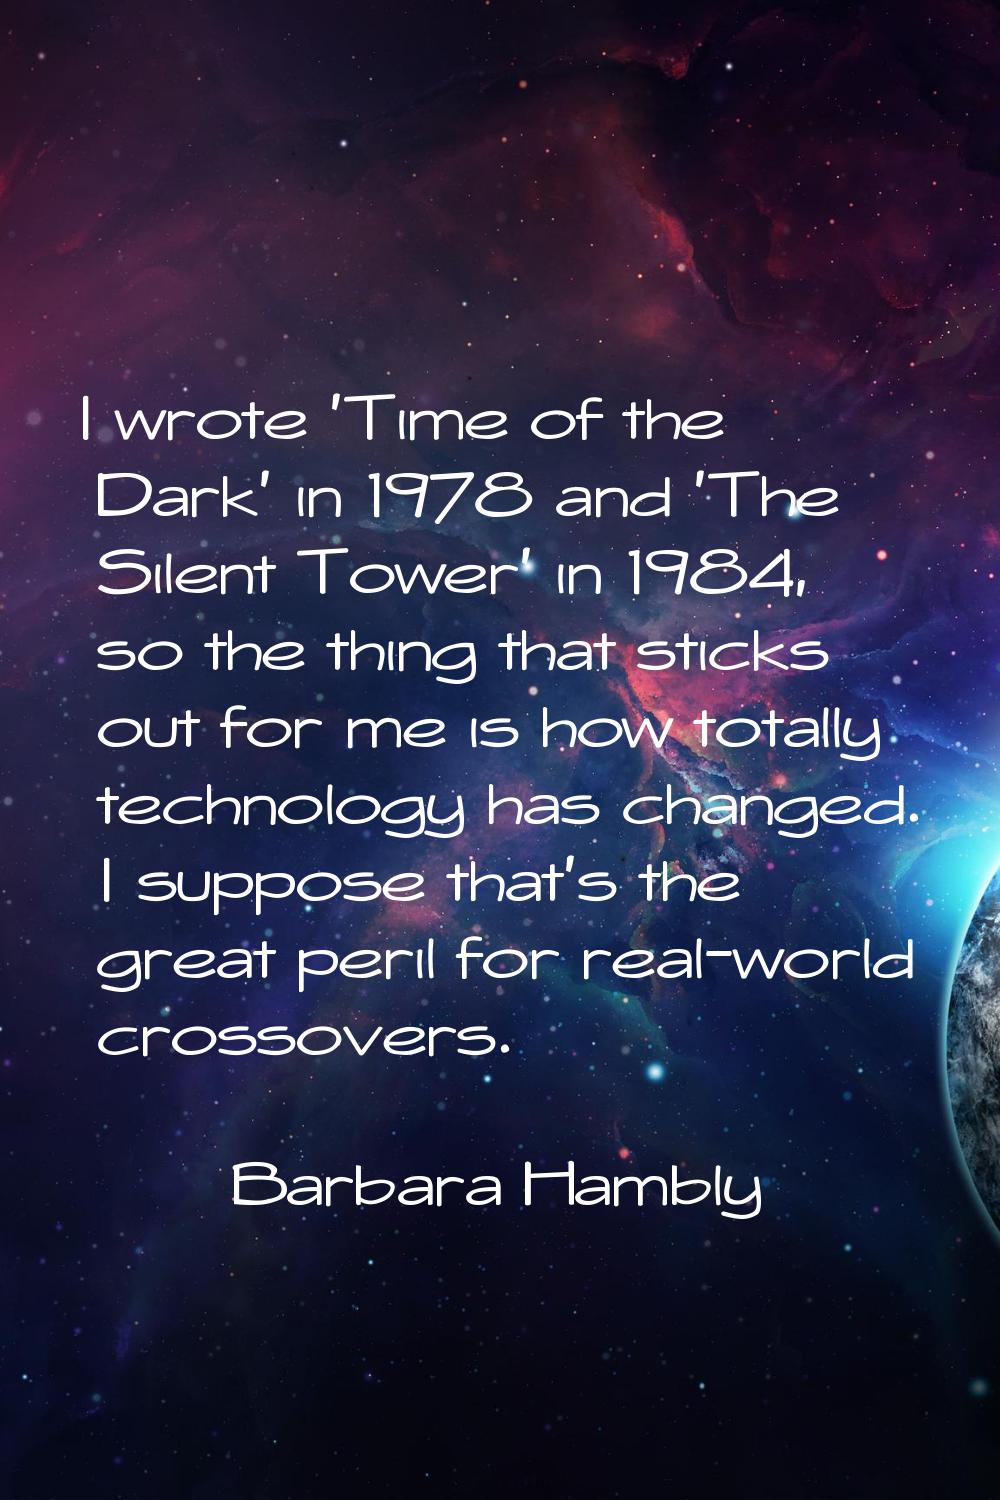 I wrote 'Time of the Dark' in 1978 and 'The Silent Tower' in 1984, so the thing that sticks out for